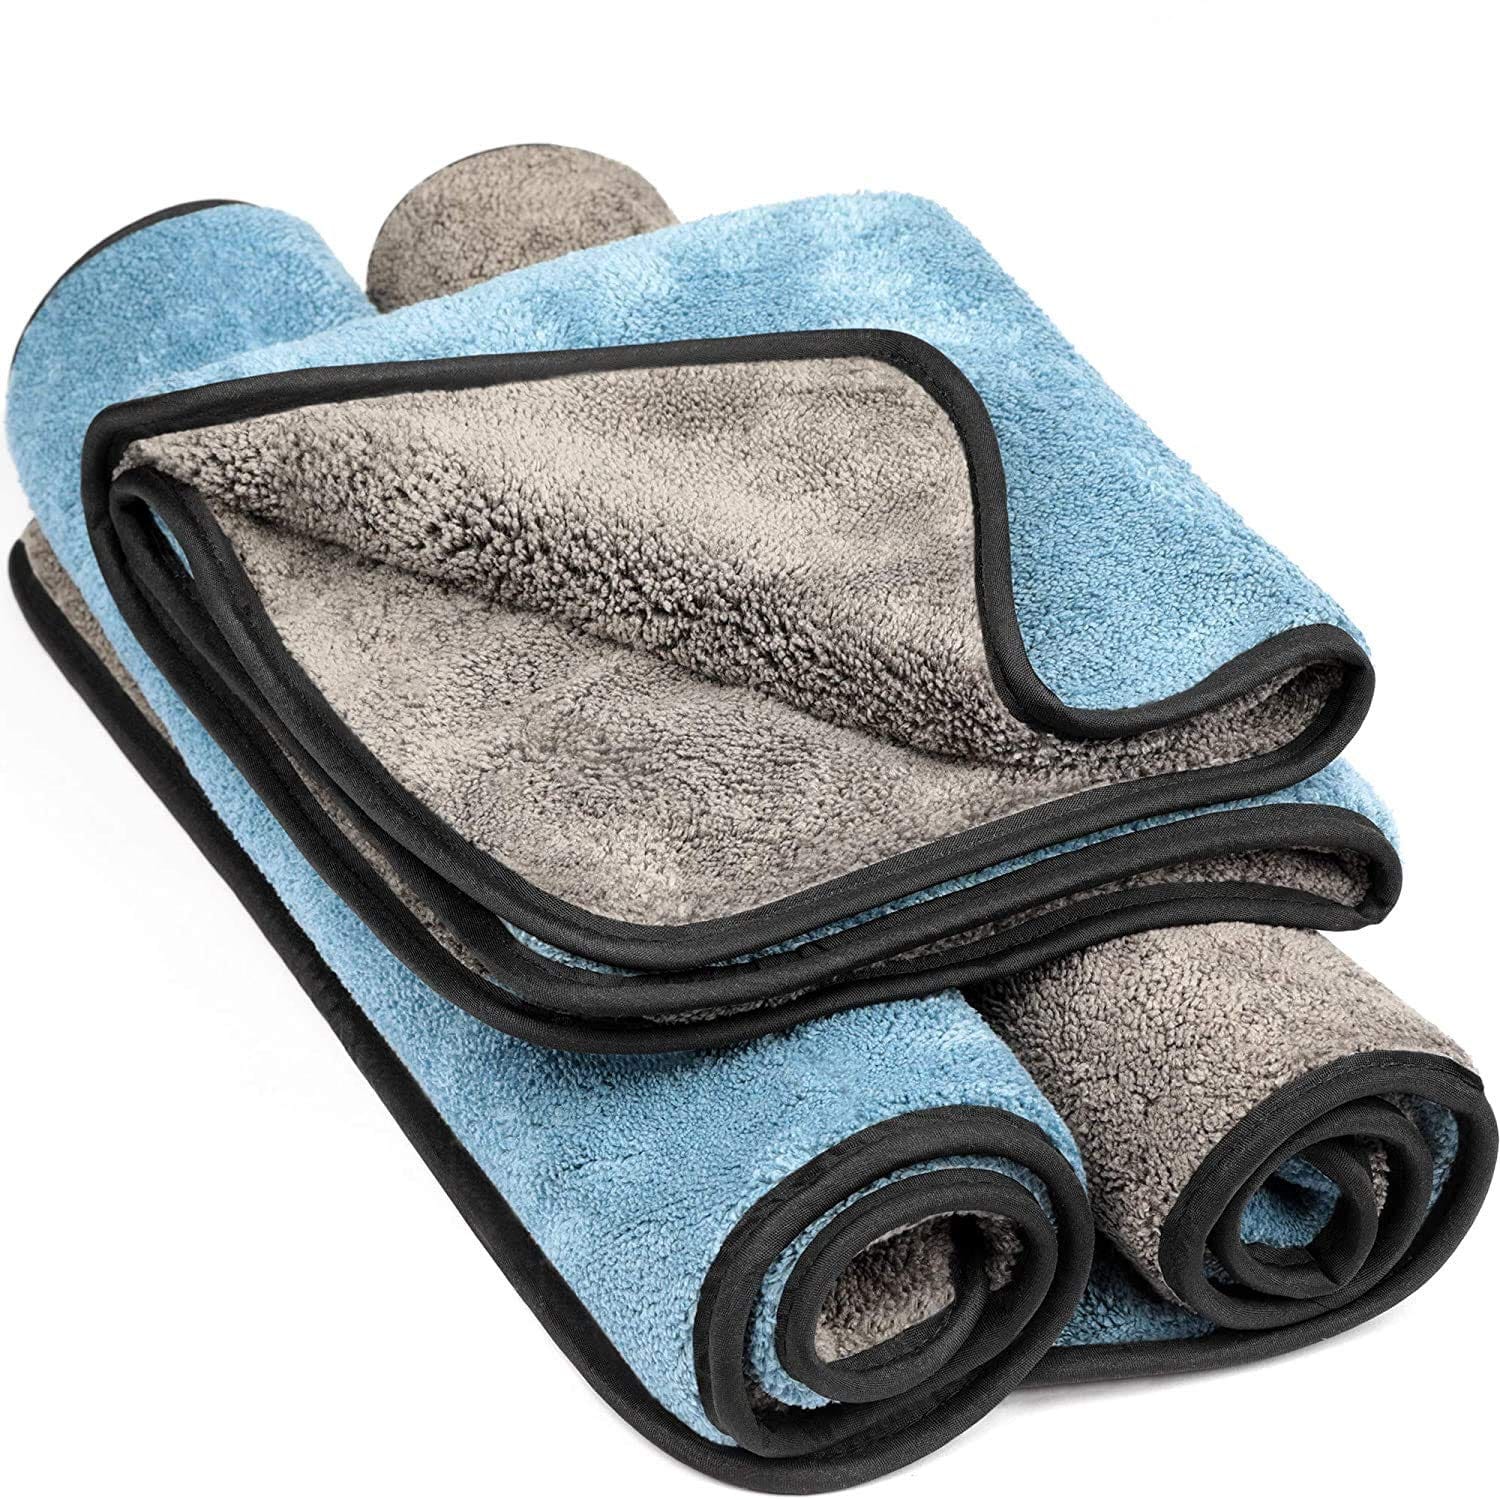 Travelwant 3Packs Microfiber Towels for Cars - Highly Absorbent Car Drying Towels, Lint-Free & Streak-Free Car Wash Towels, Multiple Use Wet Polish 